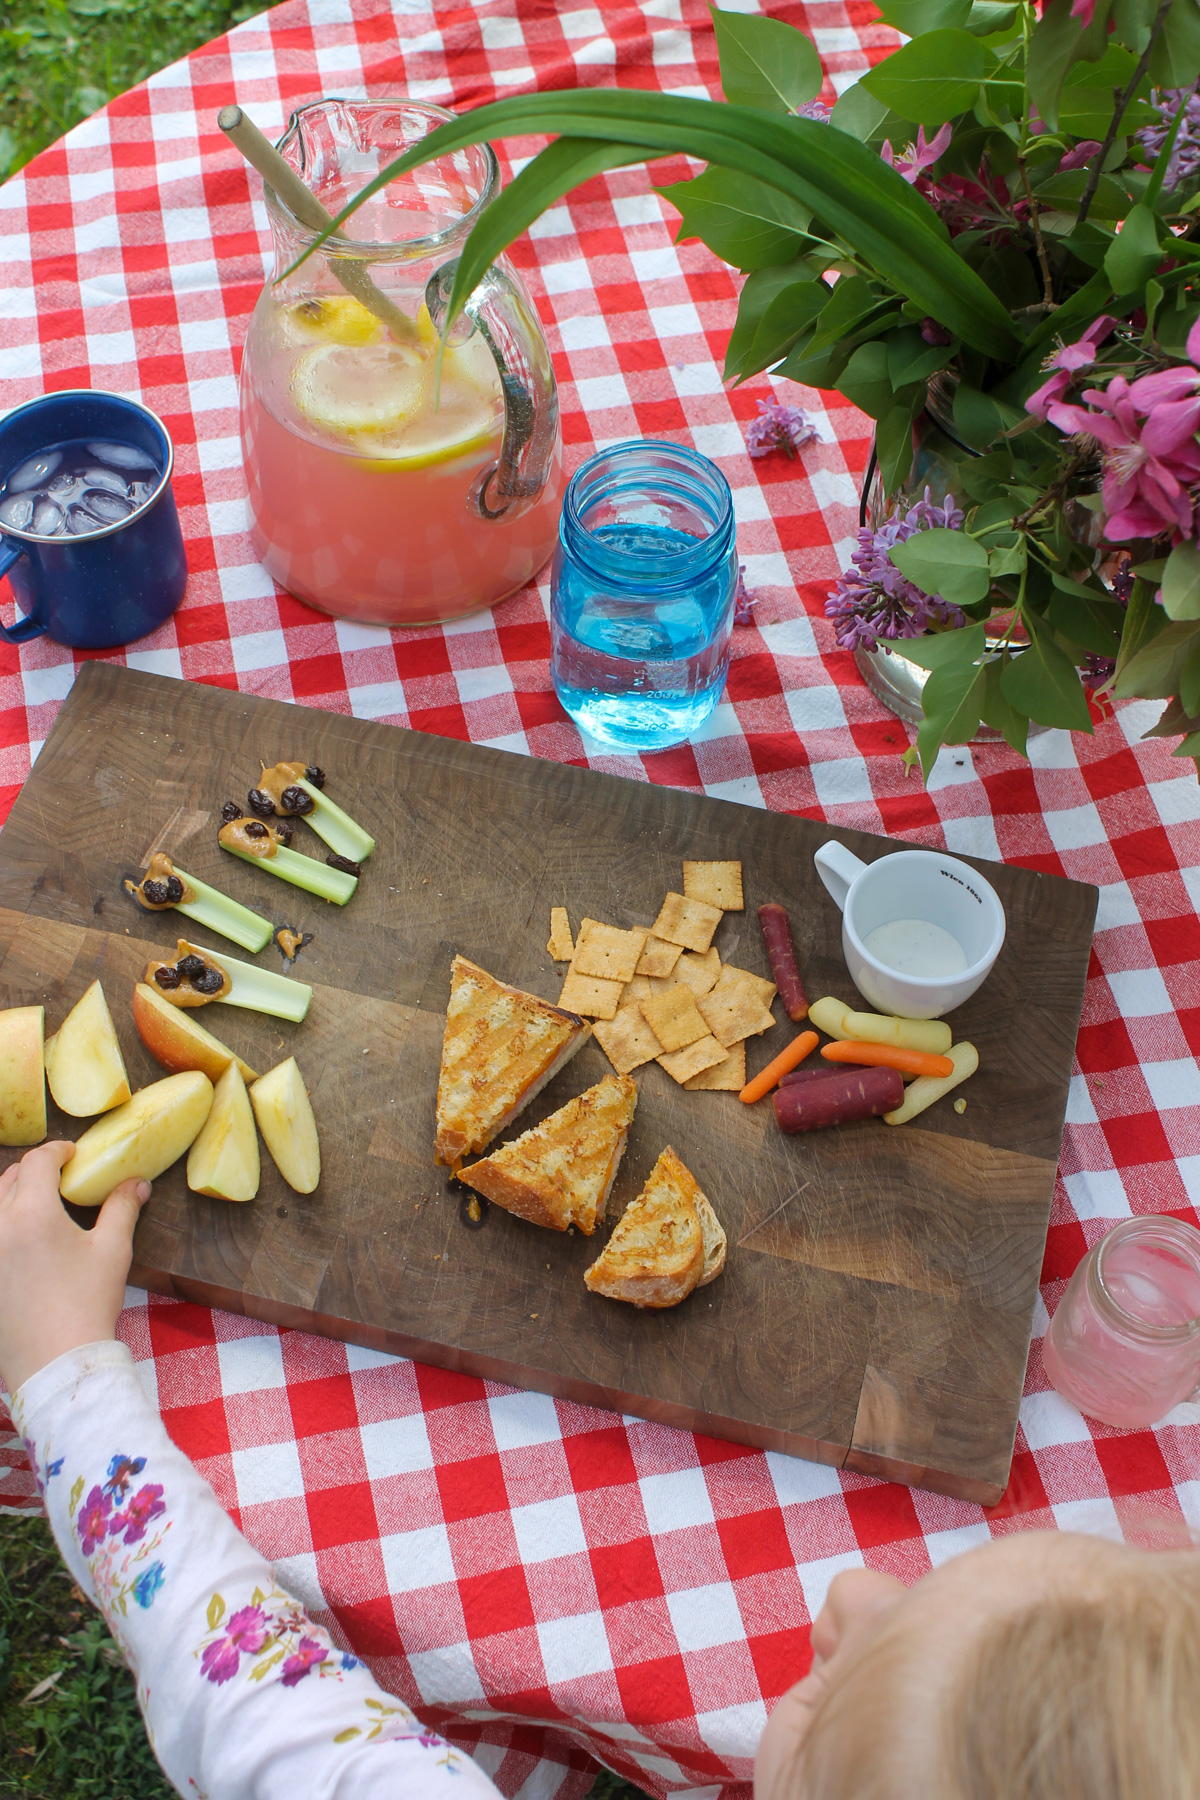 An outdoor patio lunch with a cutting board of panini sandwiches, snacks and lemonade.